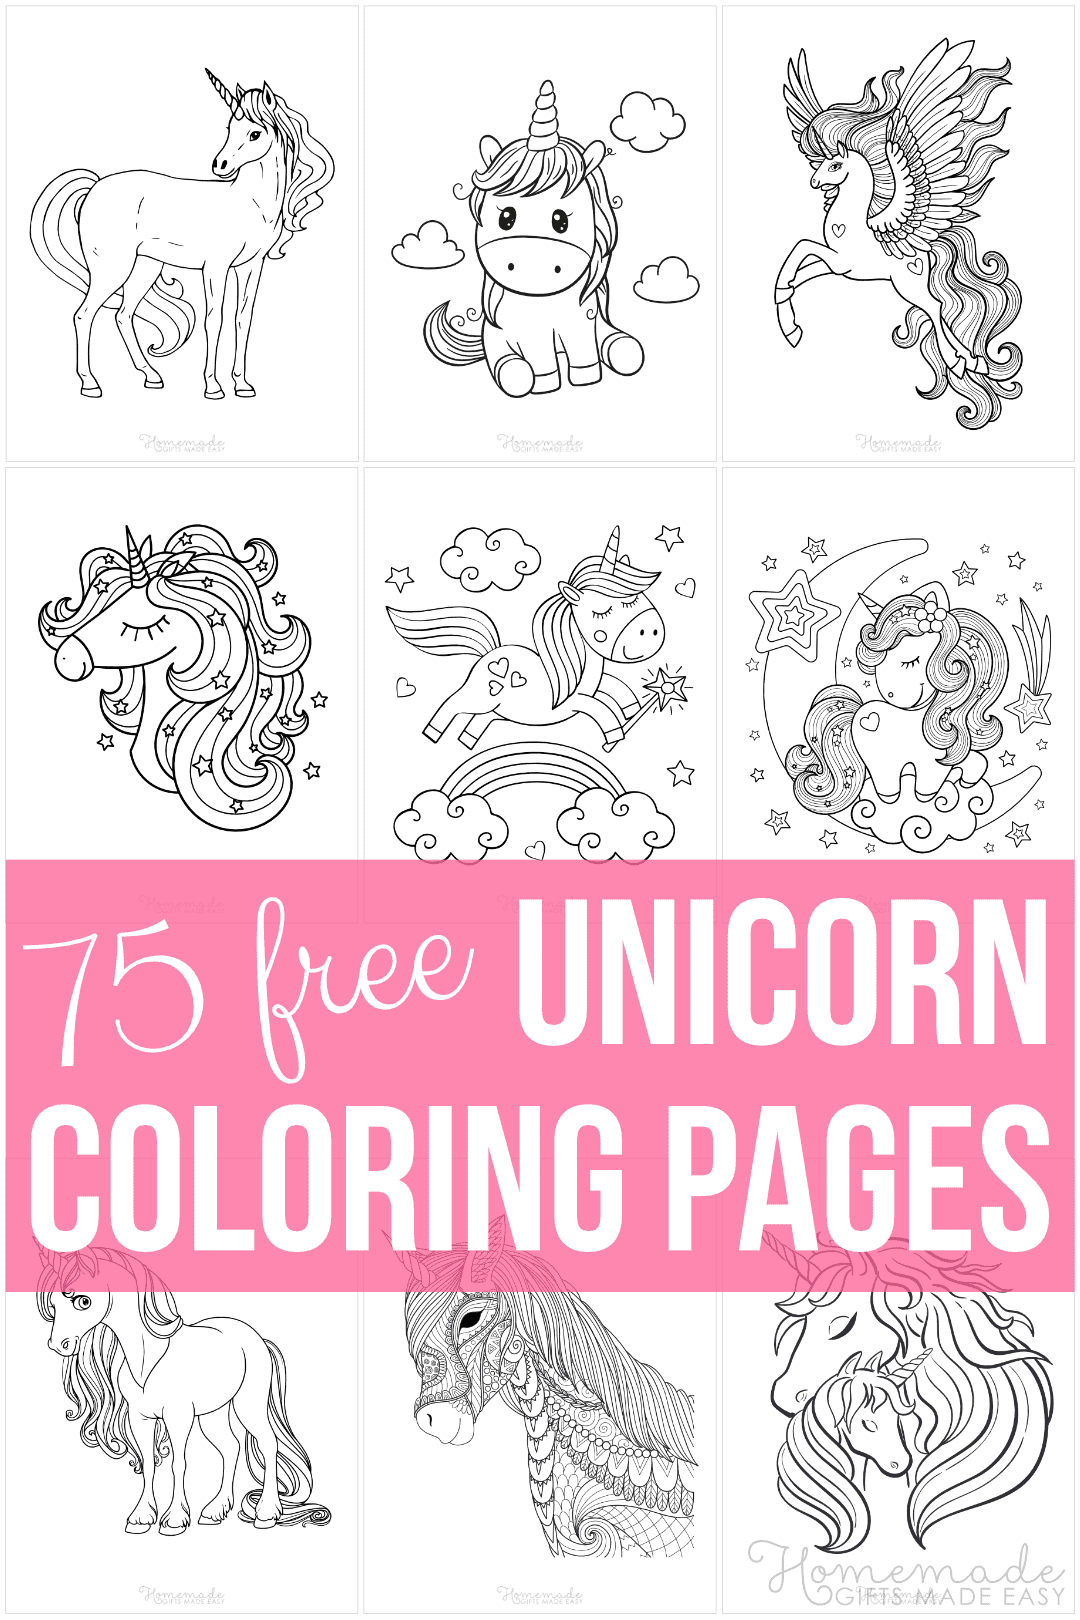 Outline Patterns Coloring Pages Set Printable Coloring Pages with Animals for Adults and Kids Instant Download Digital Coloring Sheets